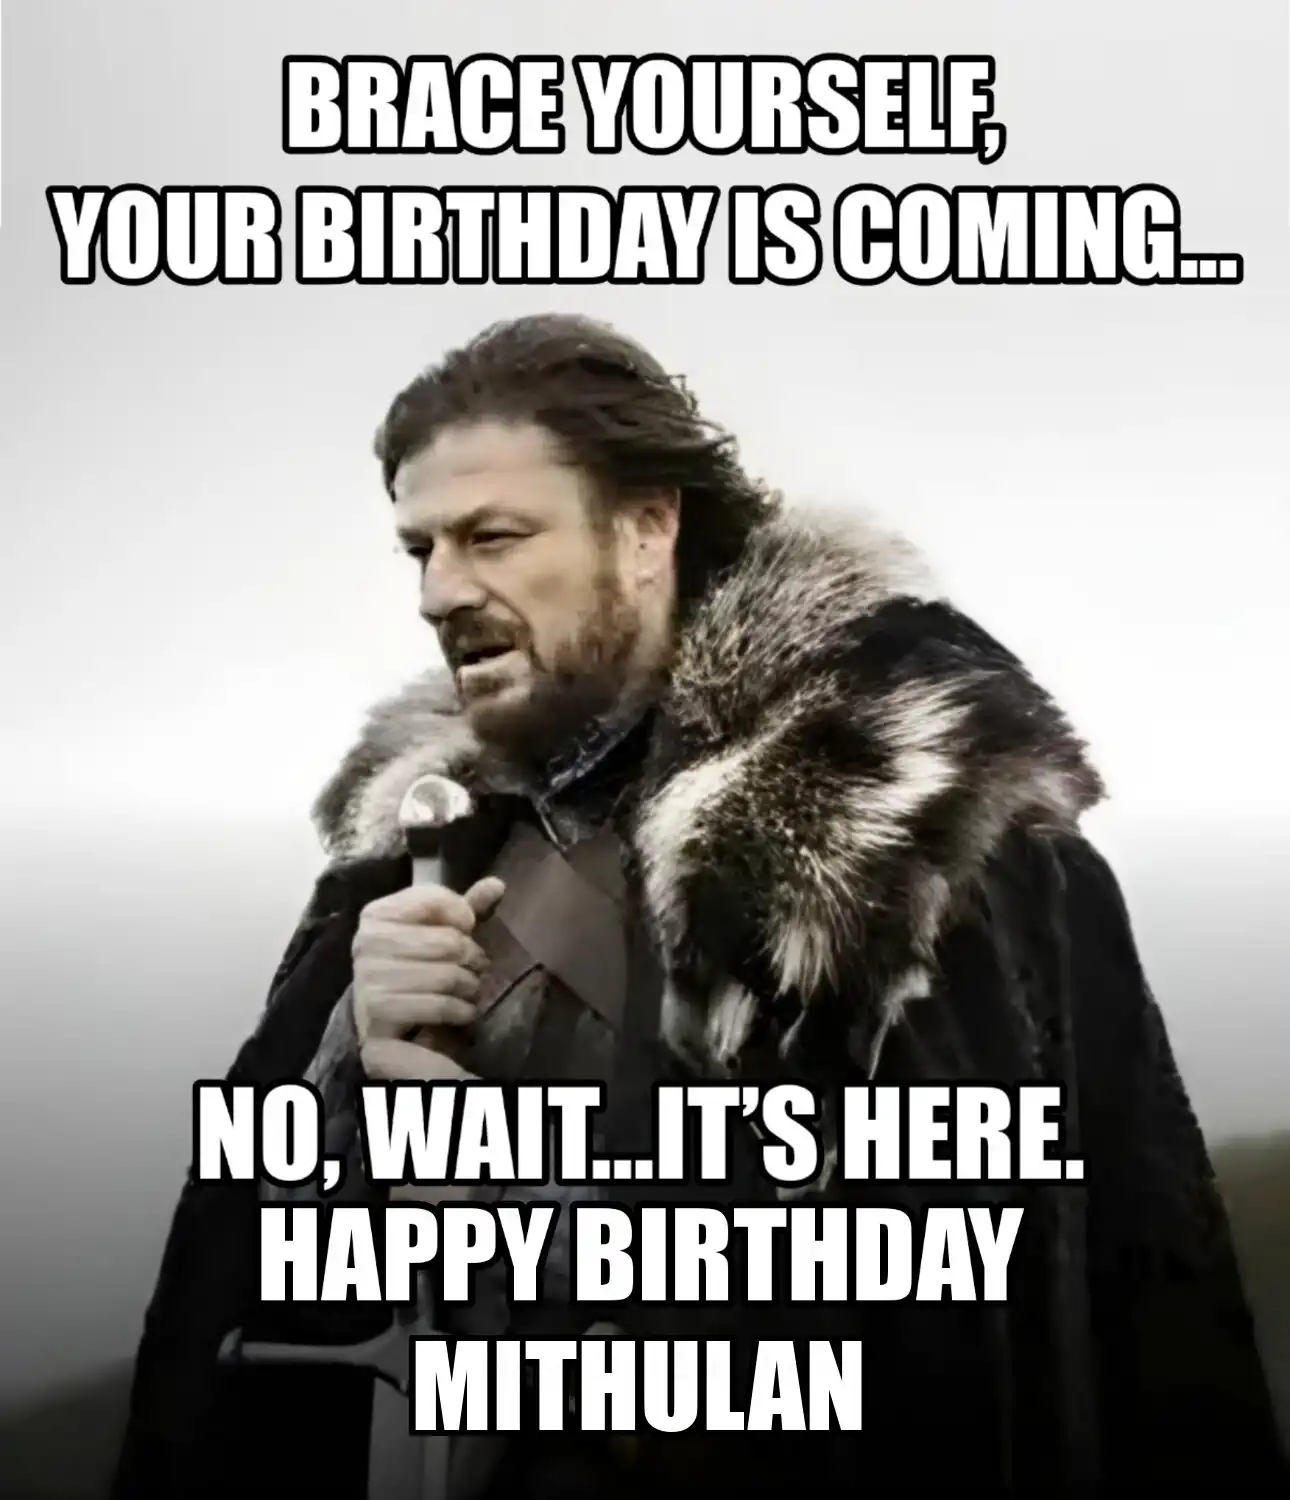 Happy Birthday Mithulan Brace Yourself Your Birthday Is Coming Meme